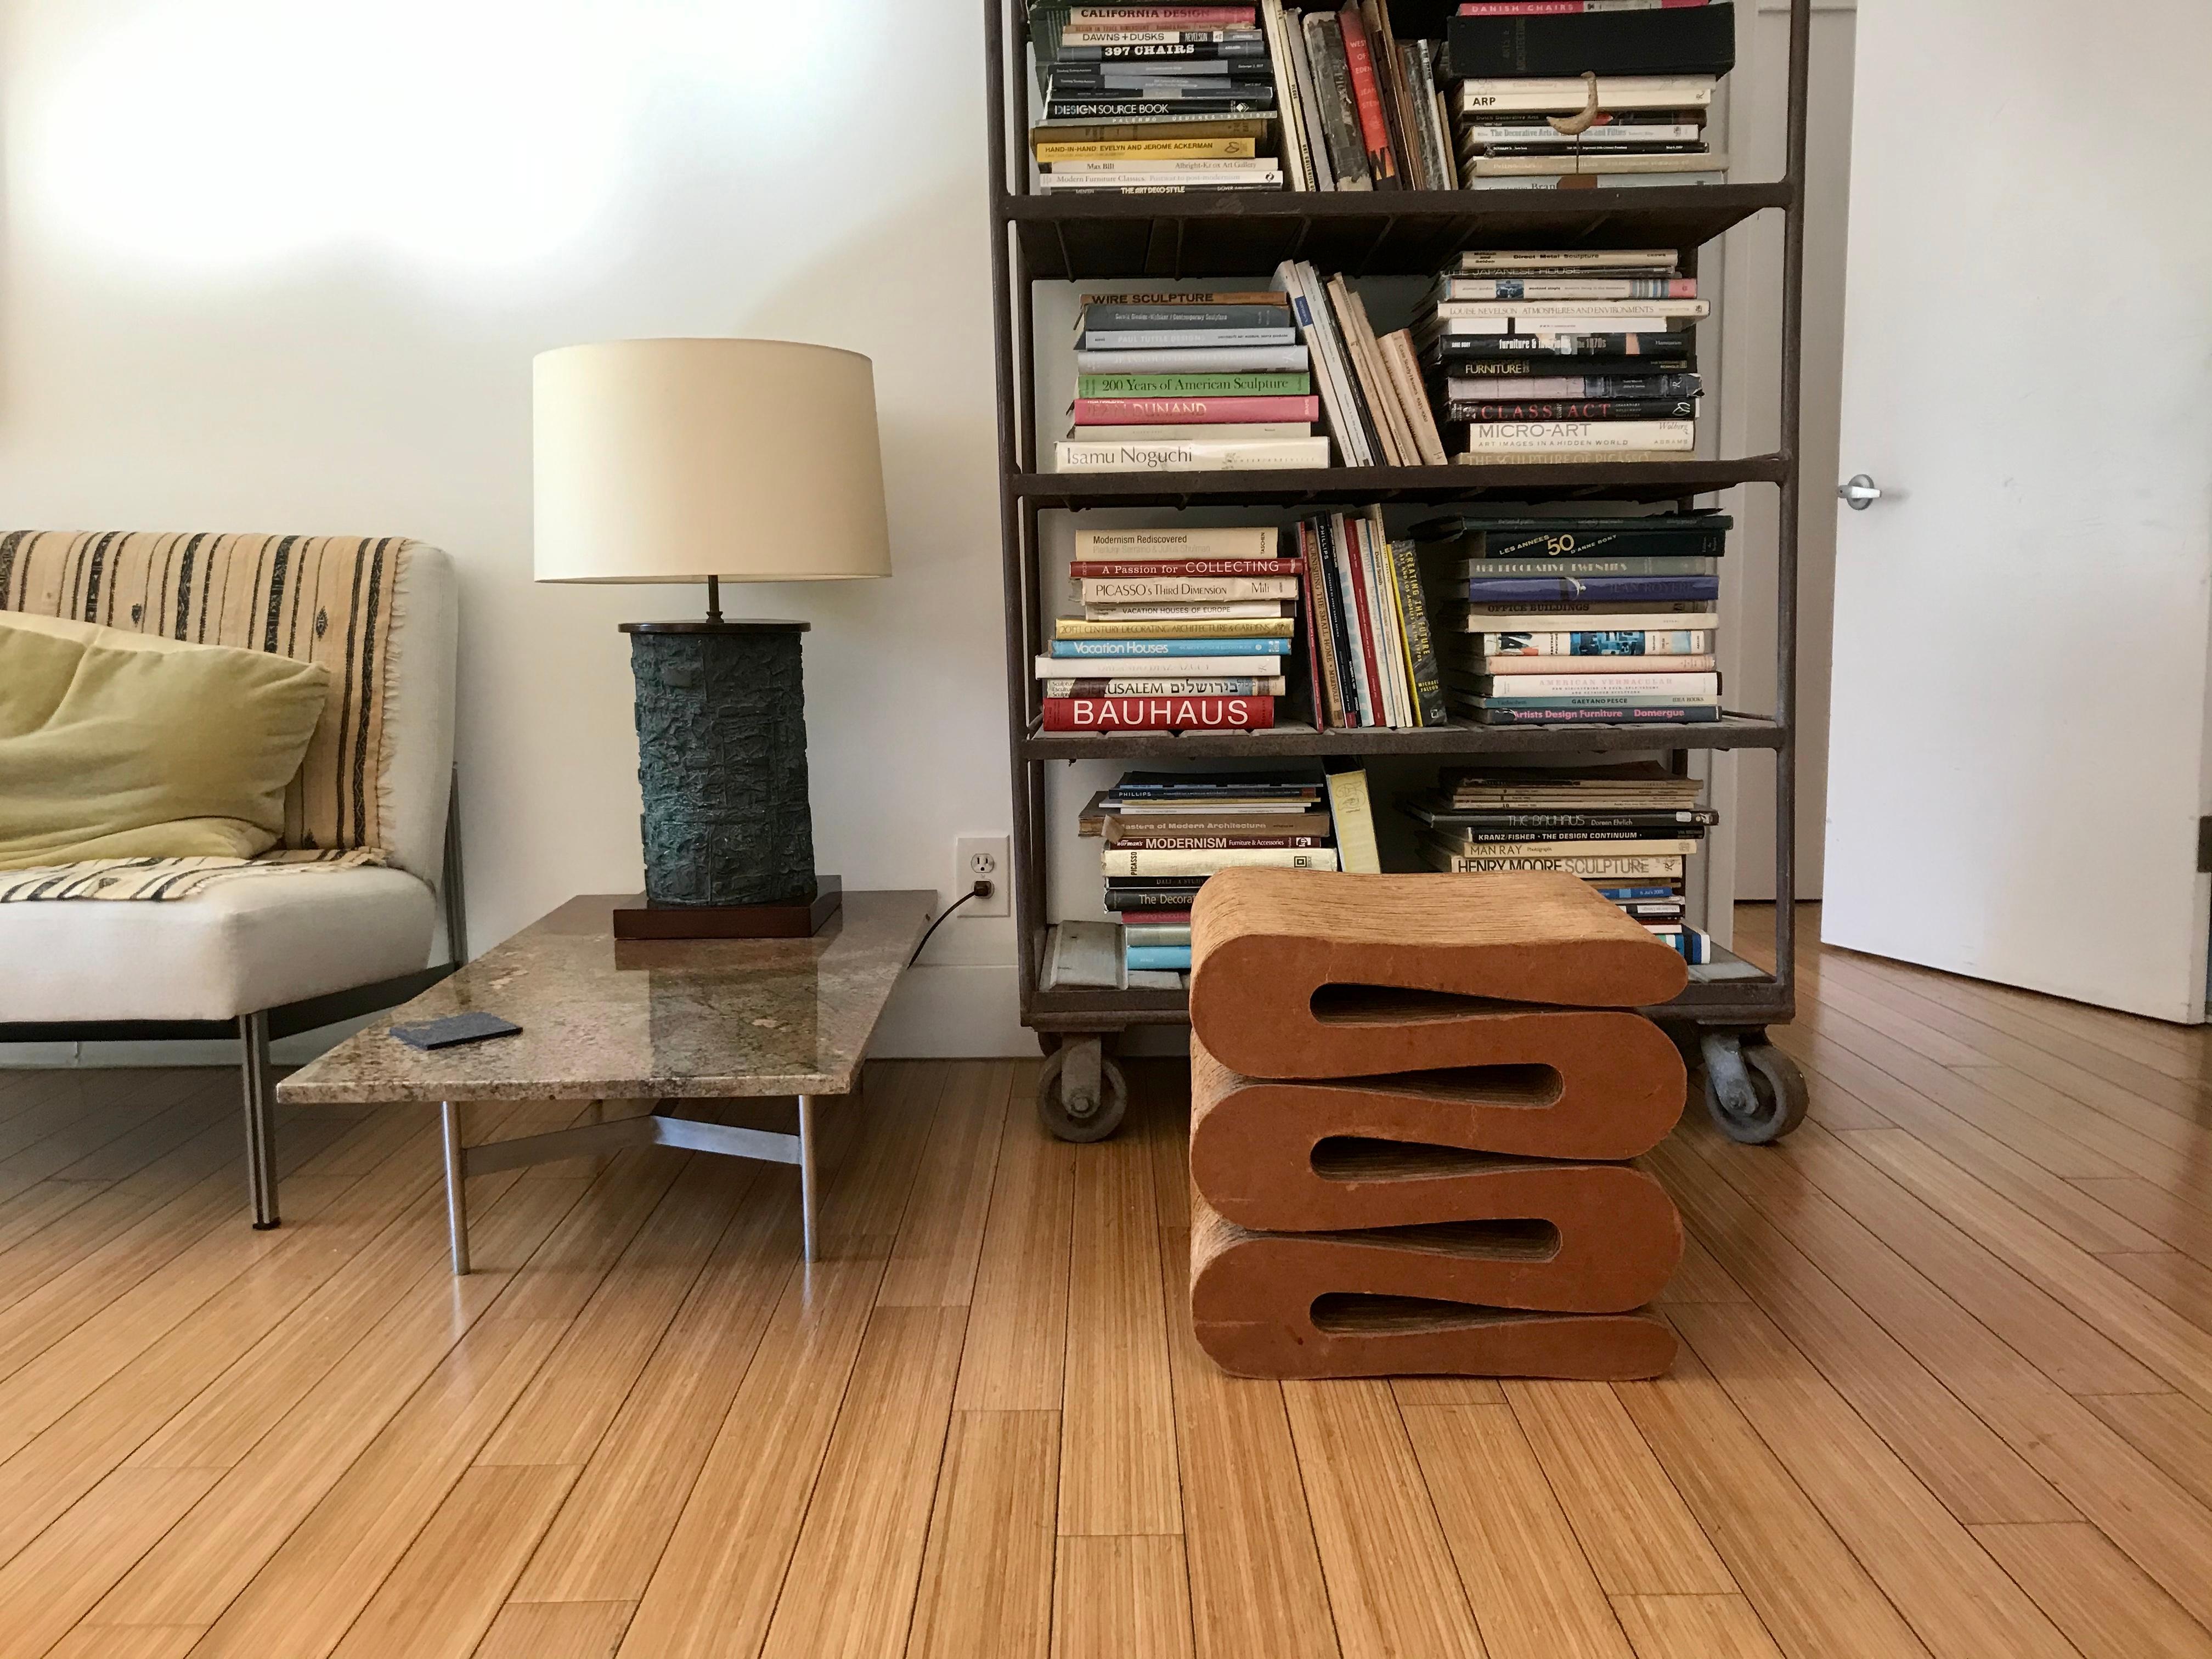 Classic Easy Edges design
Form + function
Furniture as art 
Innovative medium
Cardboard + masonite 
Original vintage condition
Minor wear with a great patina consistent with age
Solid and sturdy
Great for any occasion as a stool, table or add to